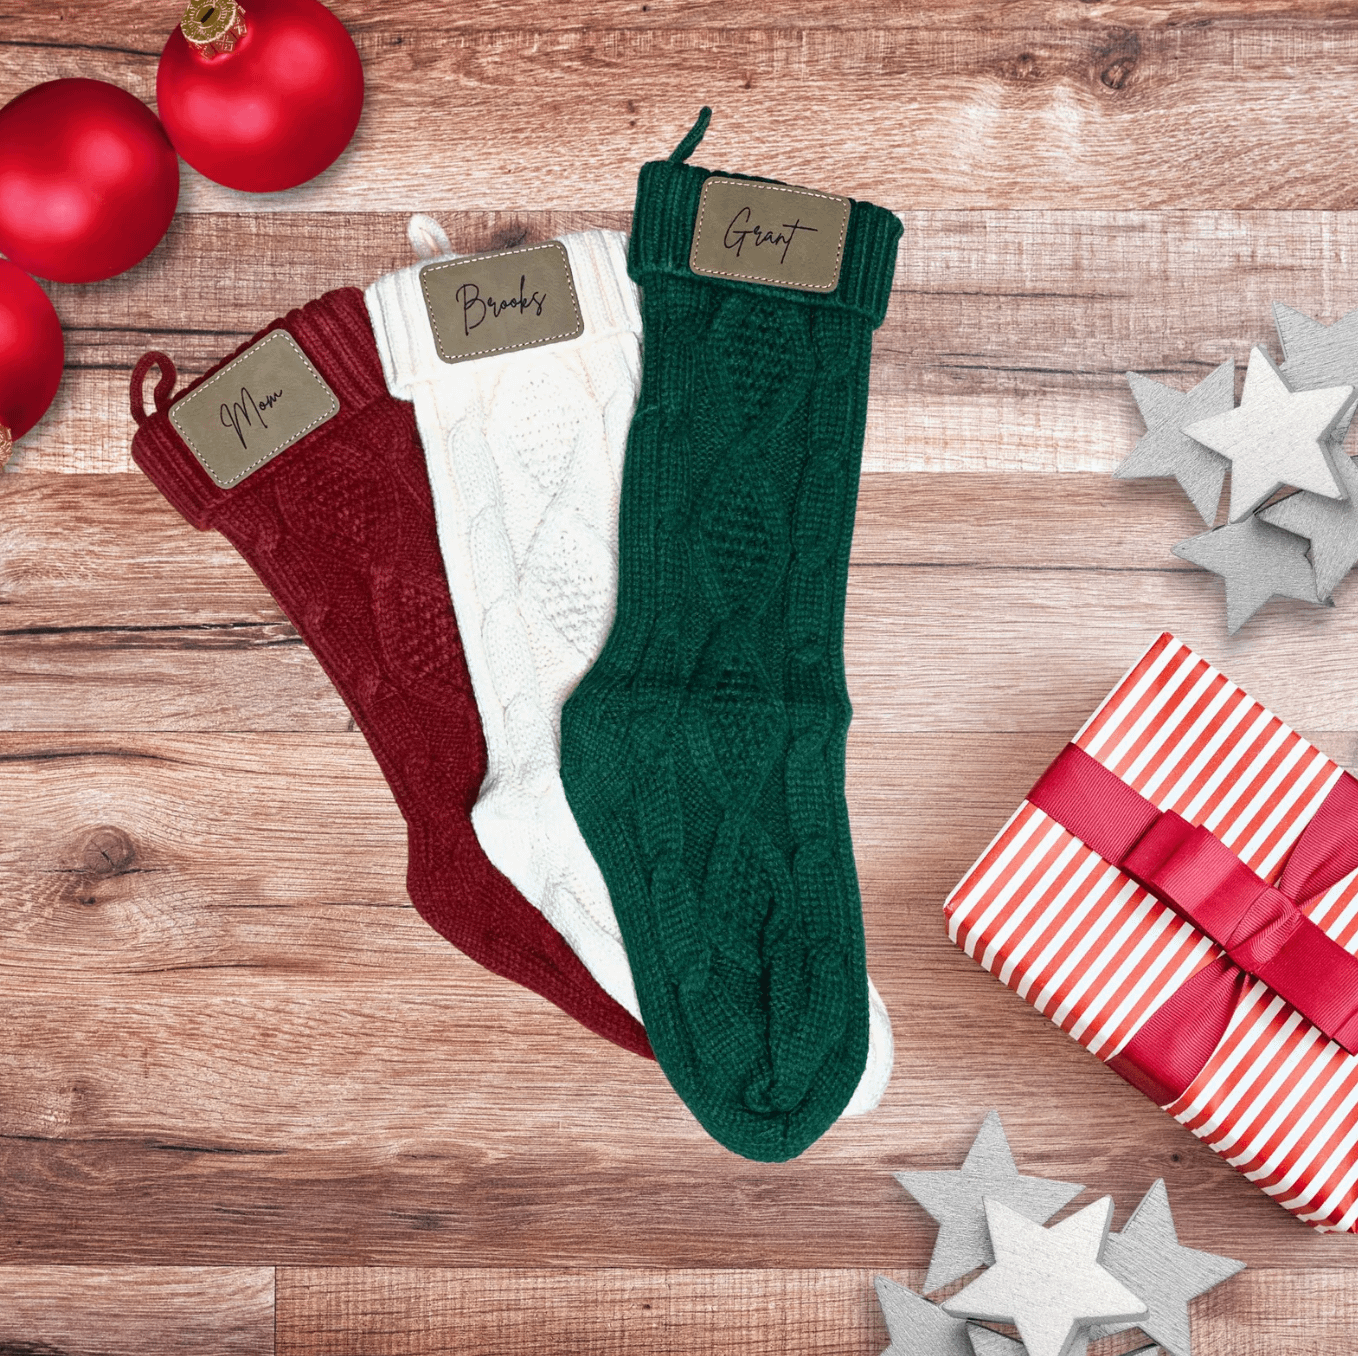 Personalized Knit Christmas Stockings with Leather Name Tag | Knitted Christmas Stocking | Personalized Christmas Gifts